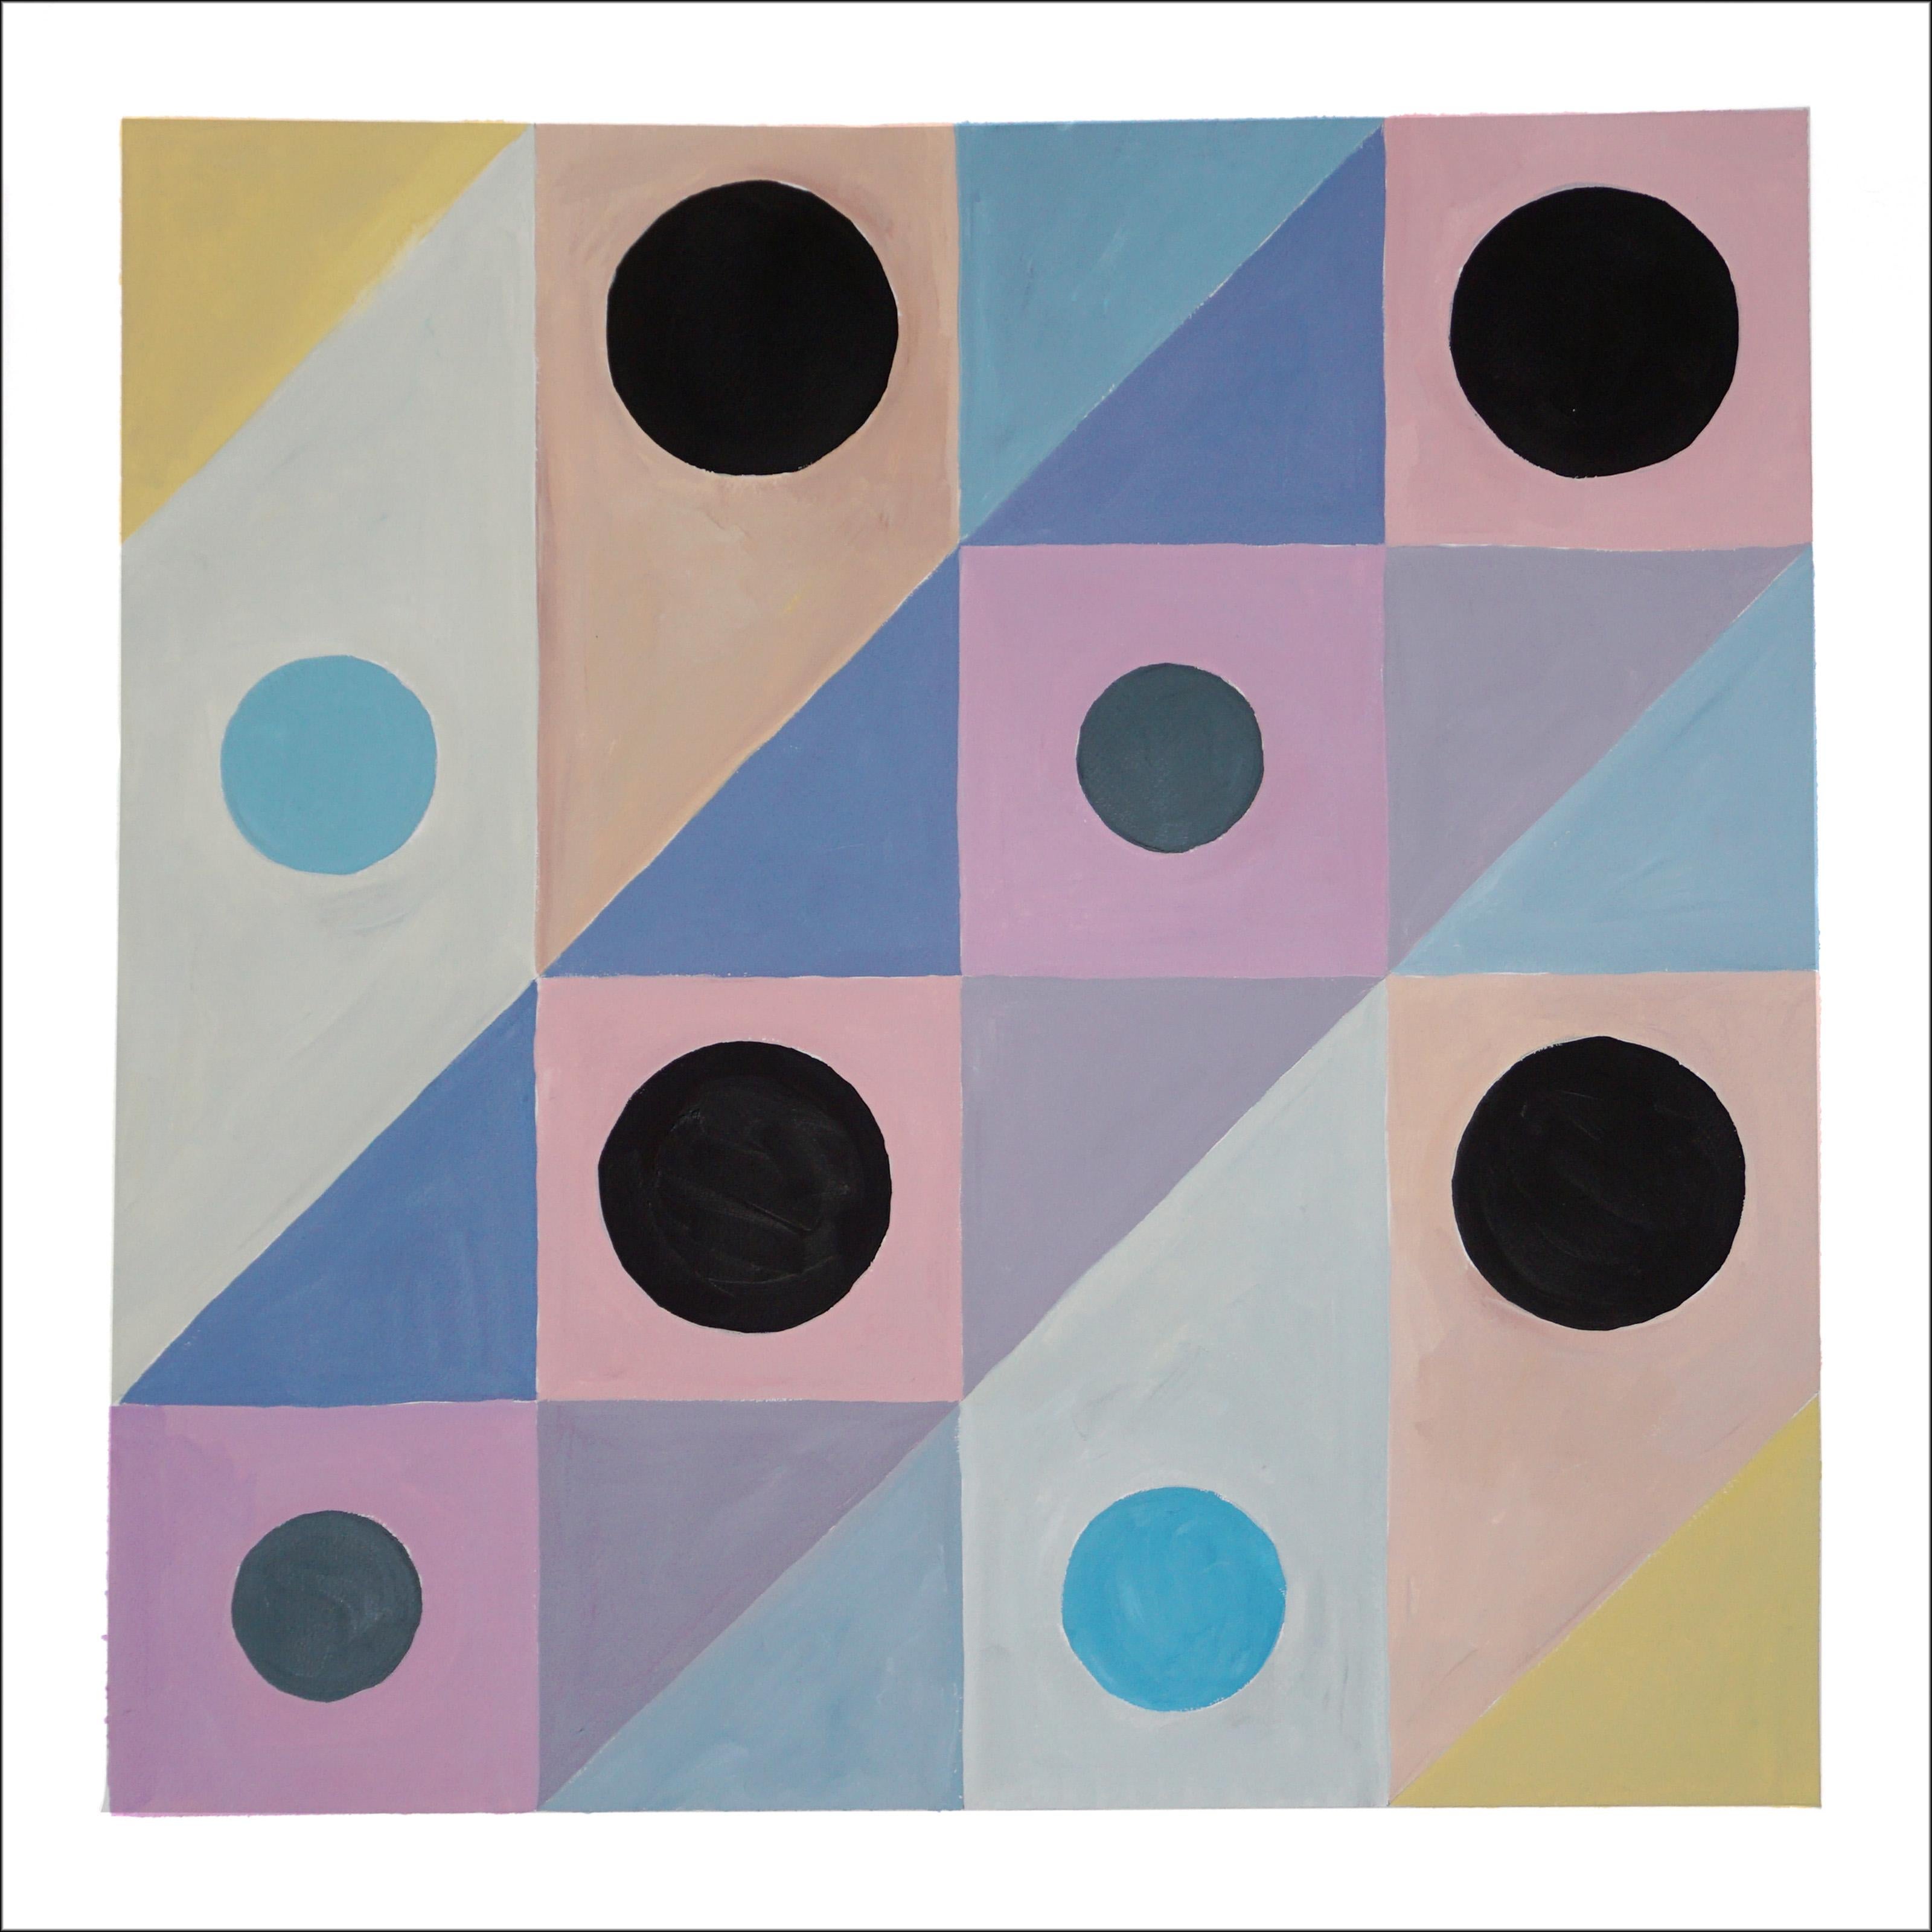 Natalia Roman Abstract Painting - Dream of an Infant, Squared Grid, Pastel Tones, Pink & Blue, Naif Pattern Circle